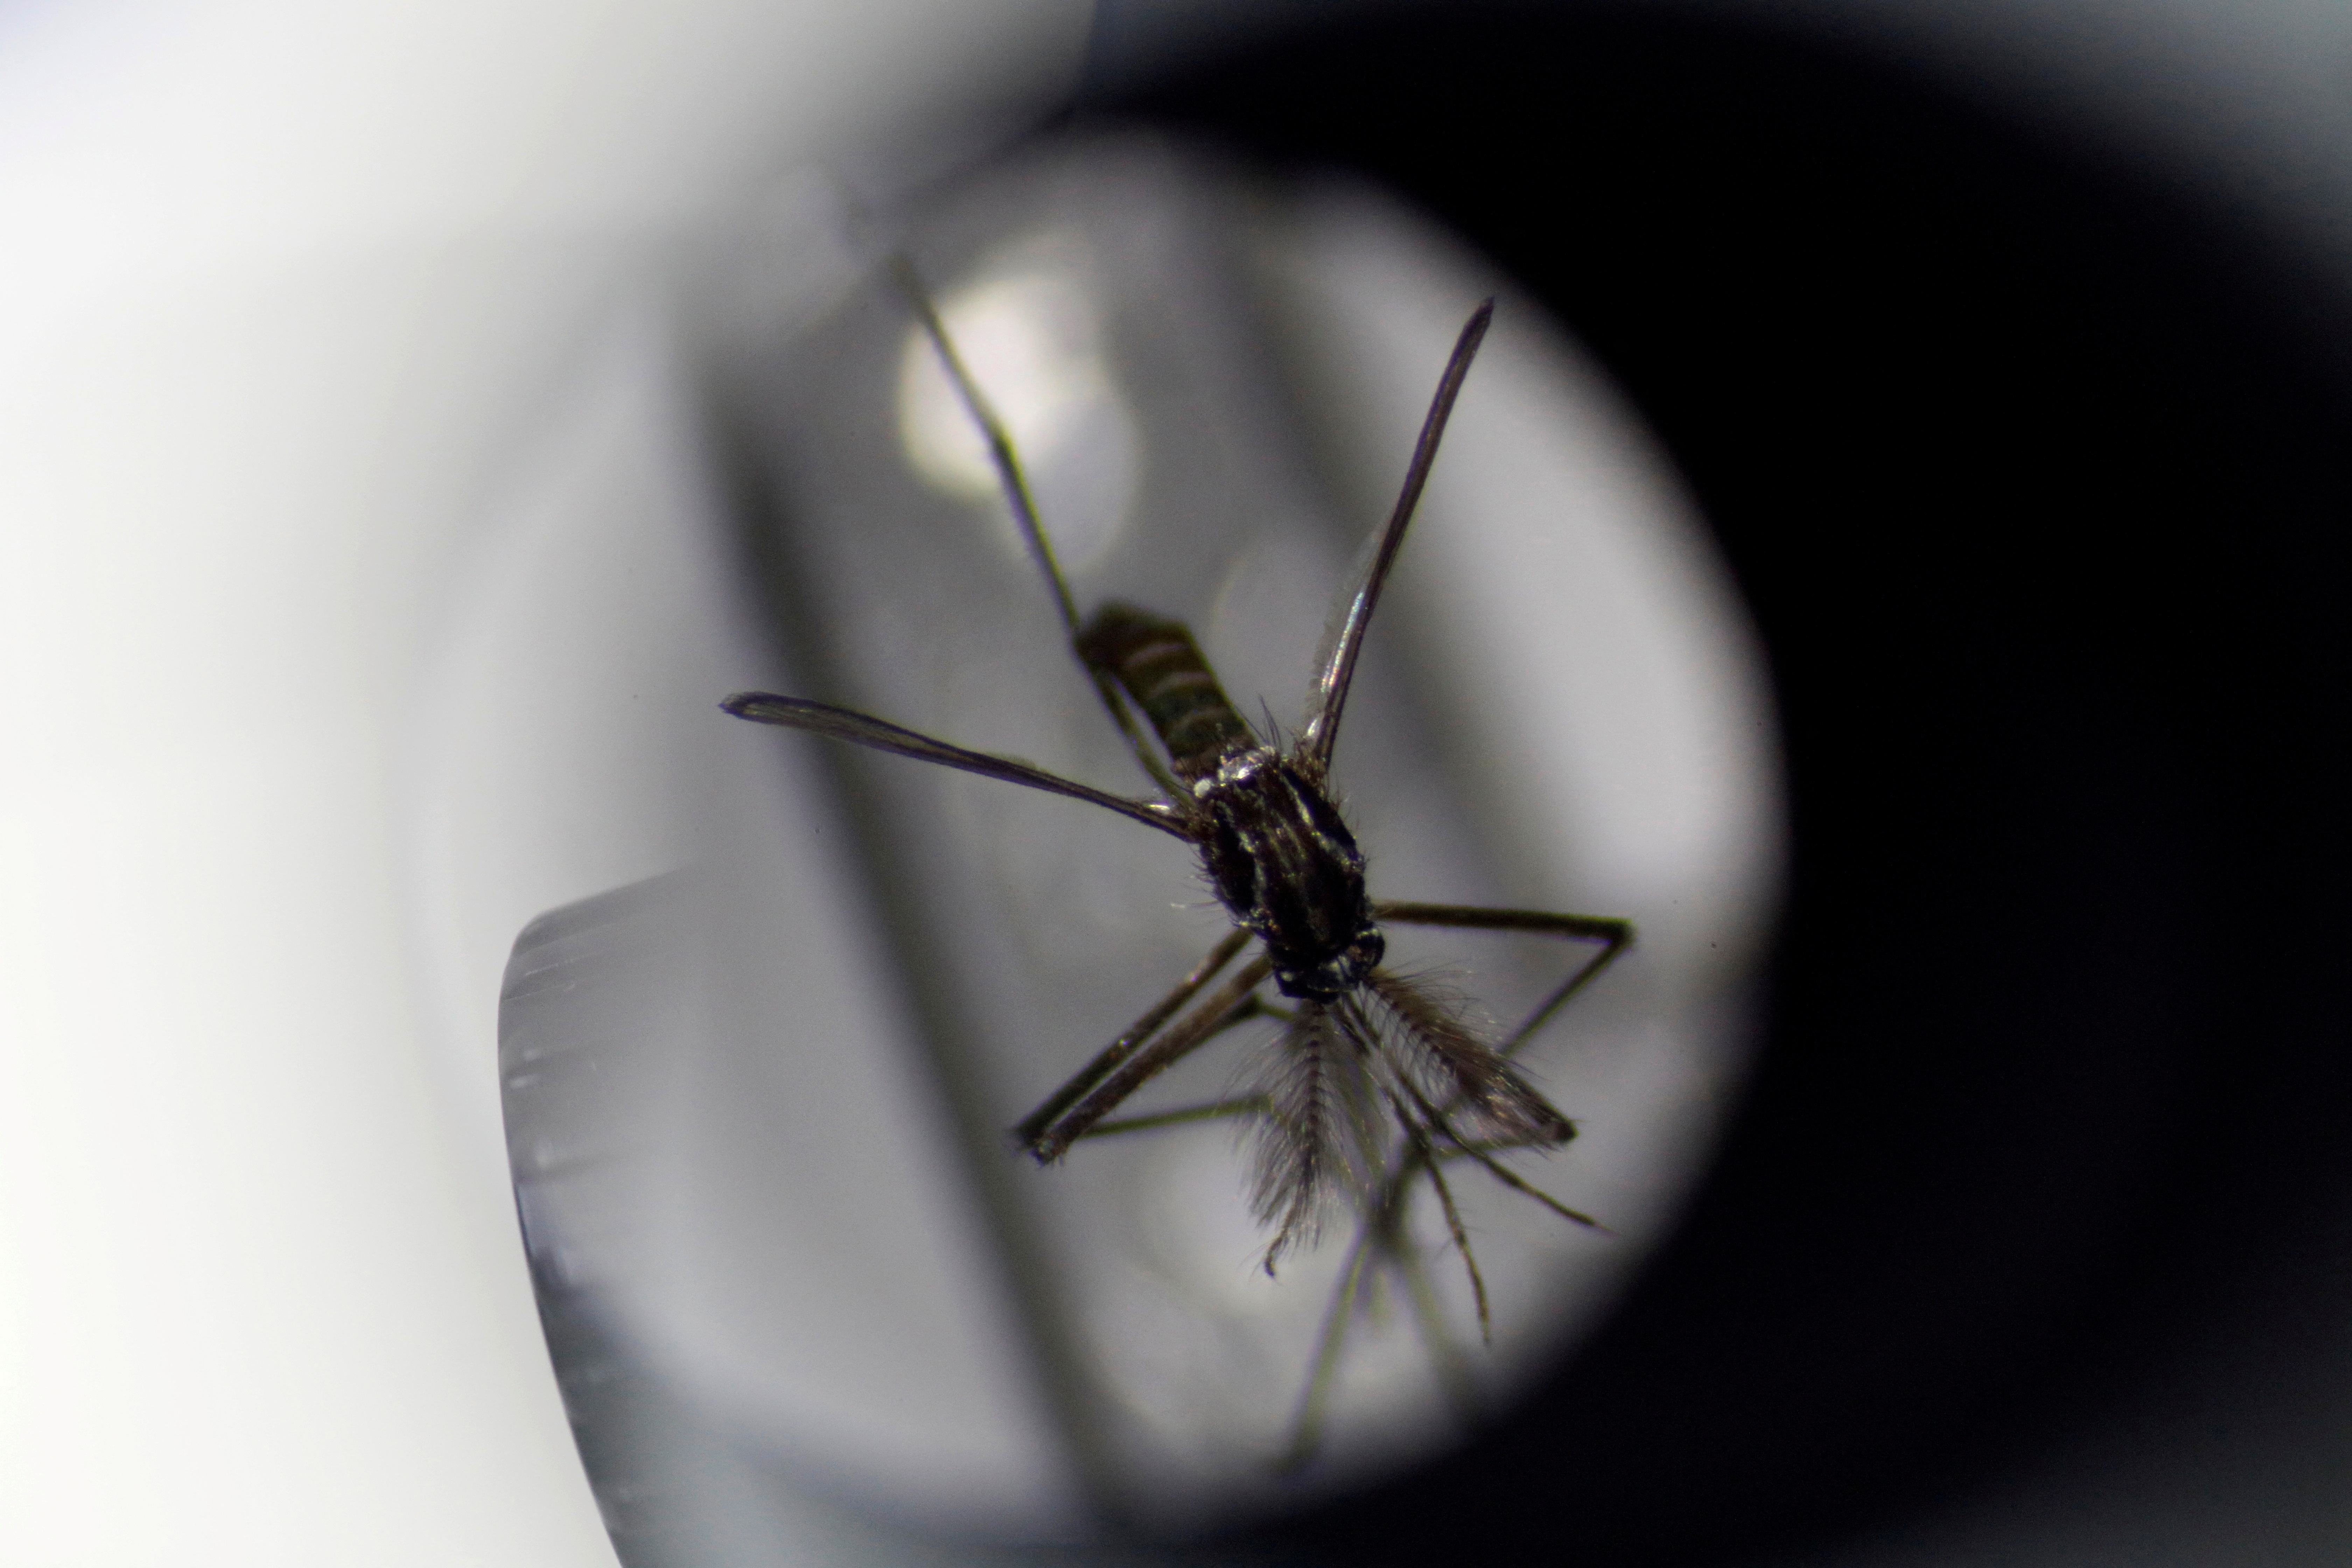 An aedes aegypti mosquito is displayed under a microscope at the National Environmental Agency's mosquito production facility in Singapore